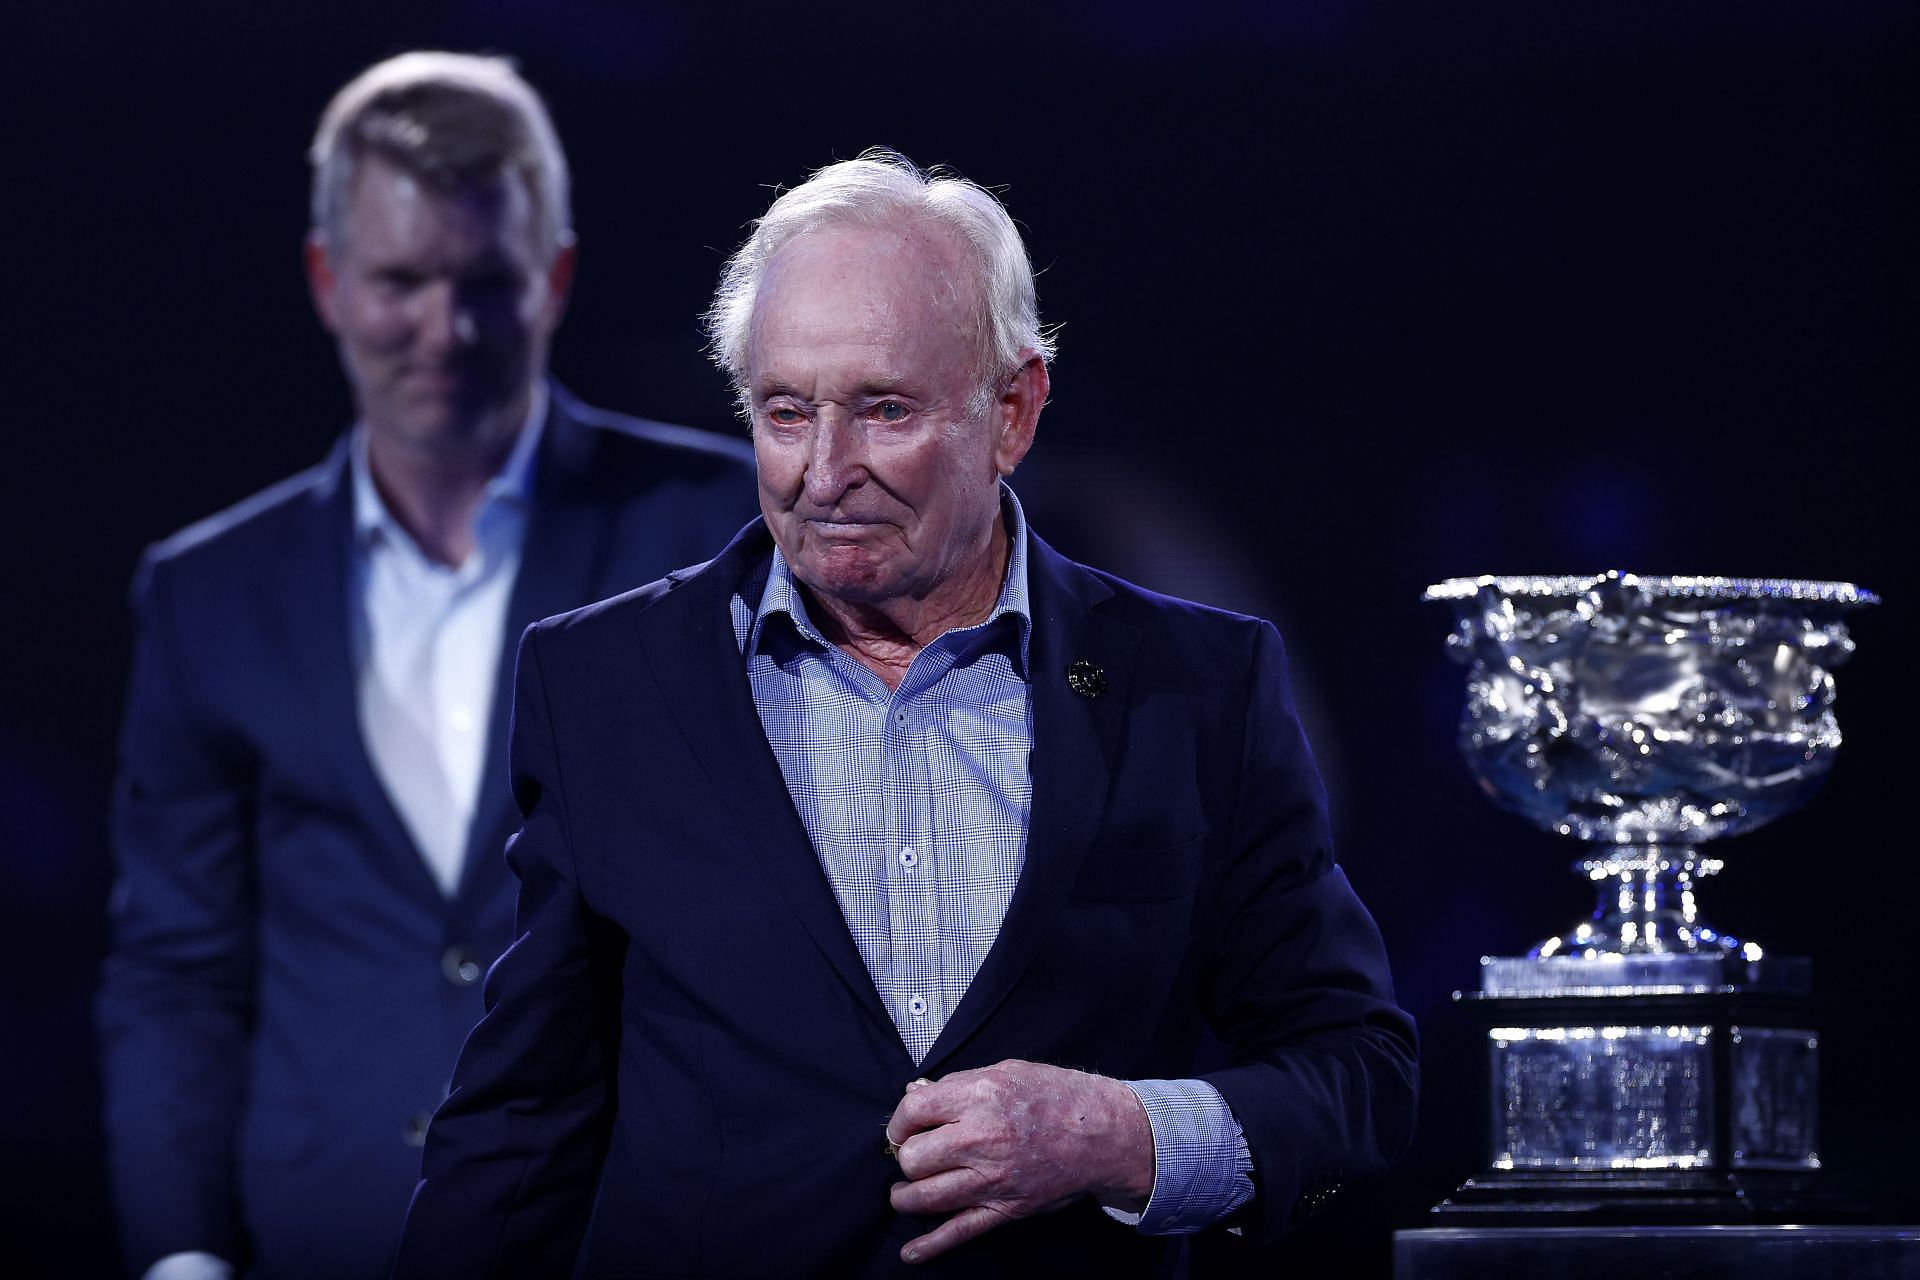 Rod Laver at the 2022 Australian Open: Day 14